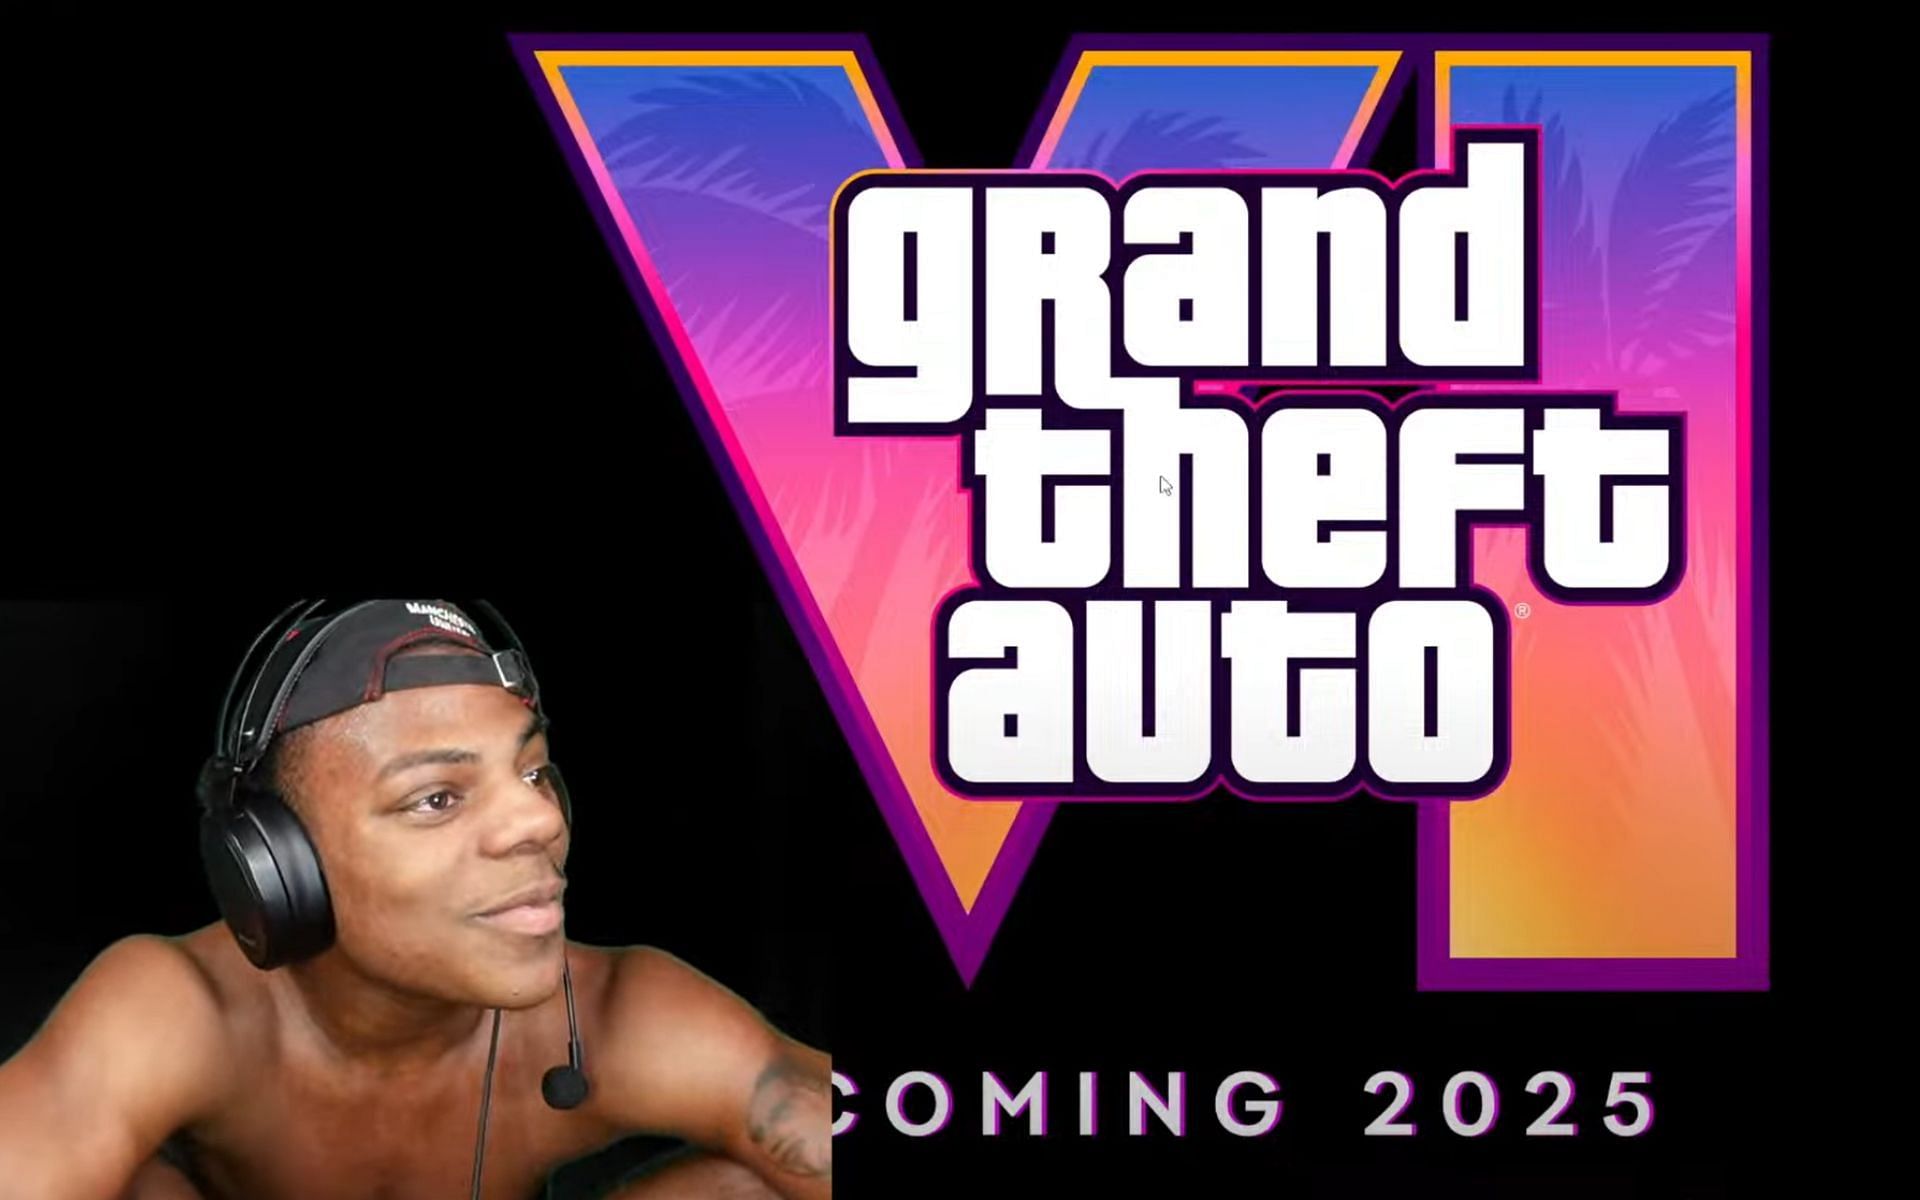 IShowSpeed jokes that he &ldquo;might not even be alive&rdquo; when GTA 6 releases in 2025 (Image via IShowSpeed/YouTube)